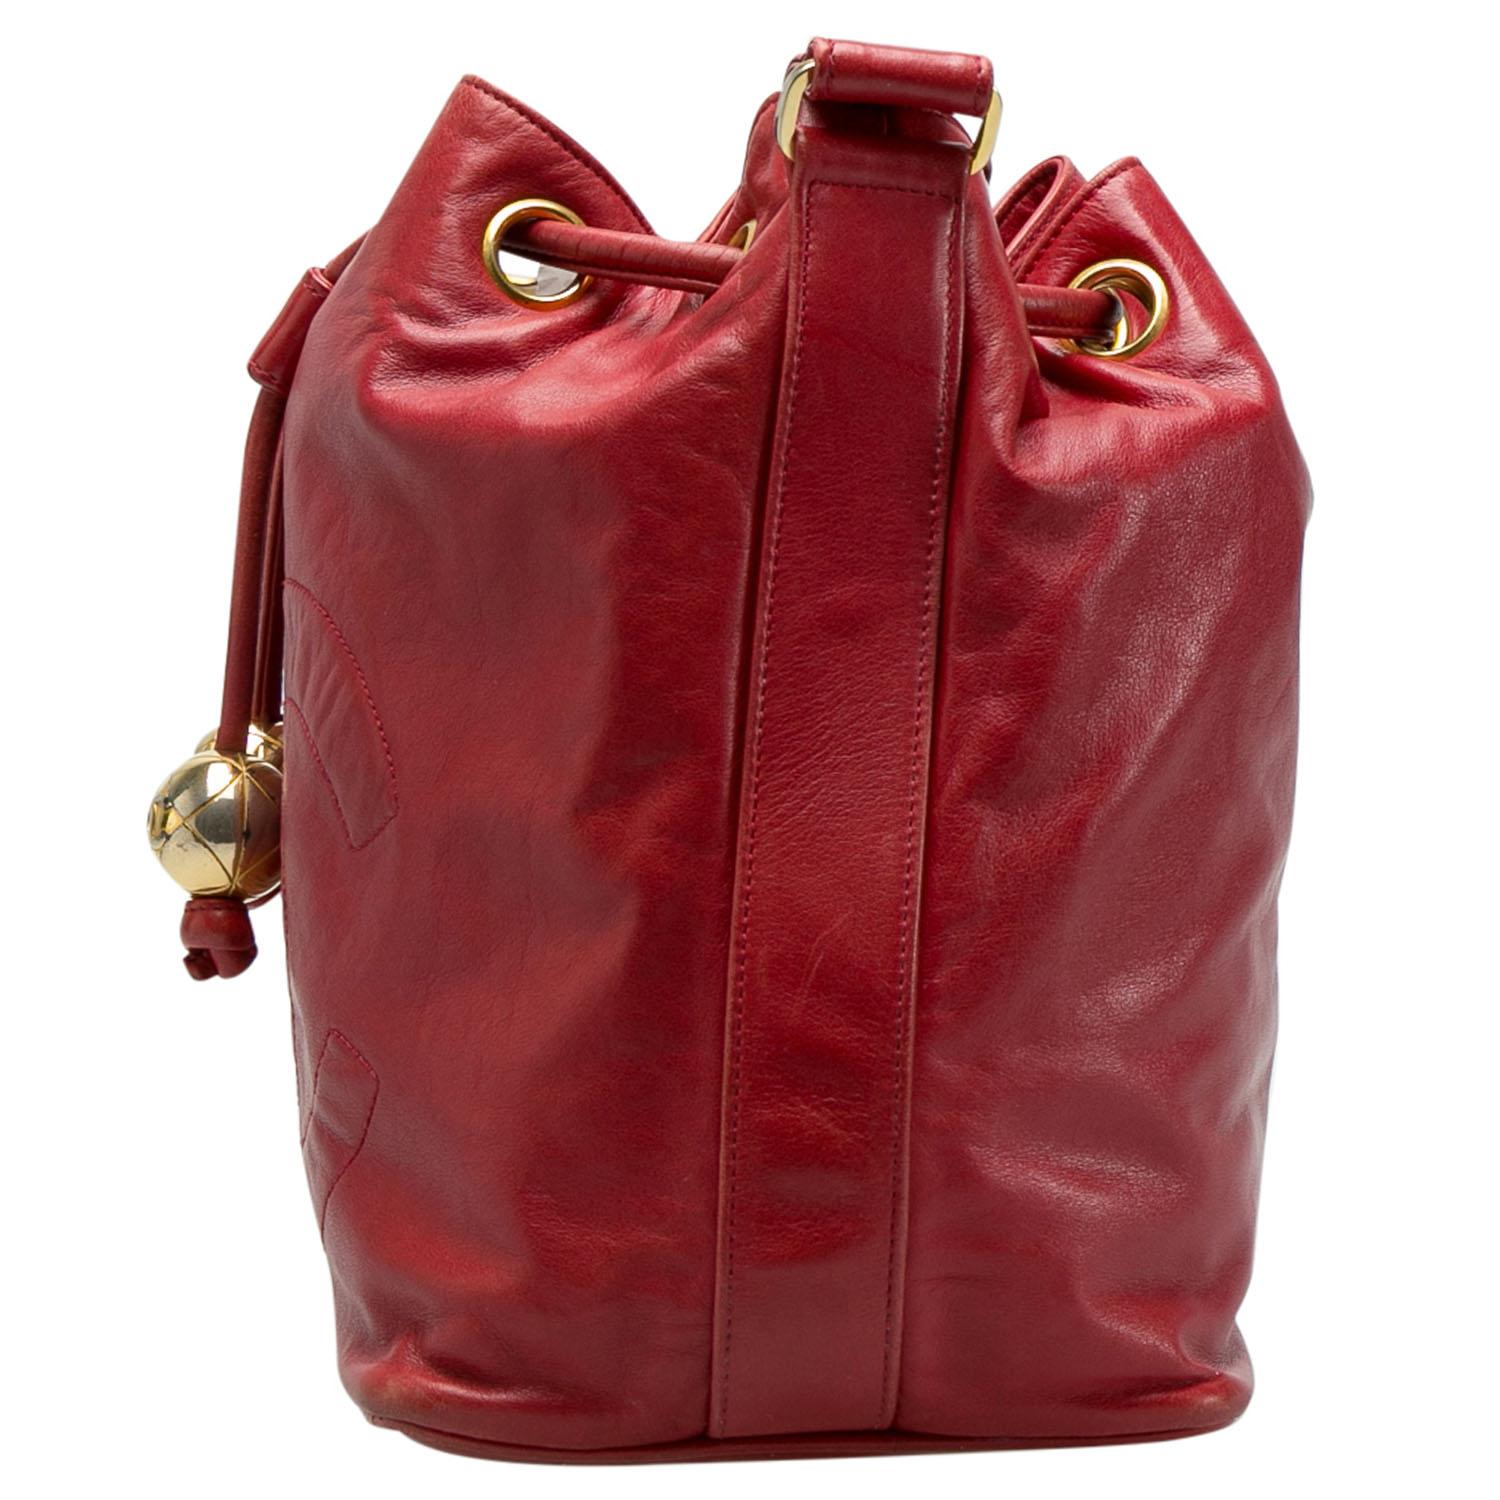 Women's Chanel Red Leather Vintage CC Drawstring Bucket Bag